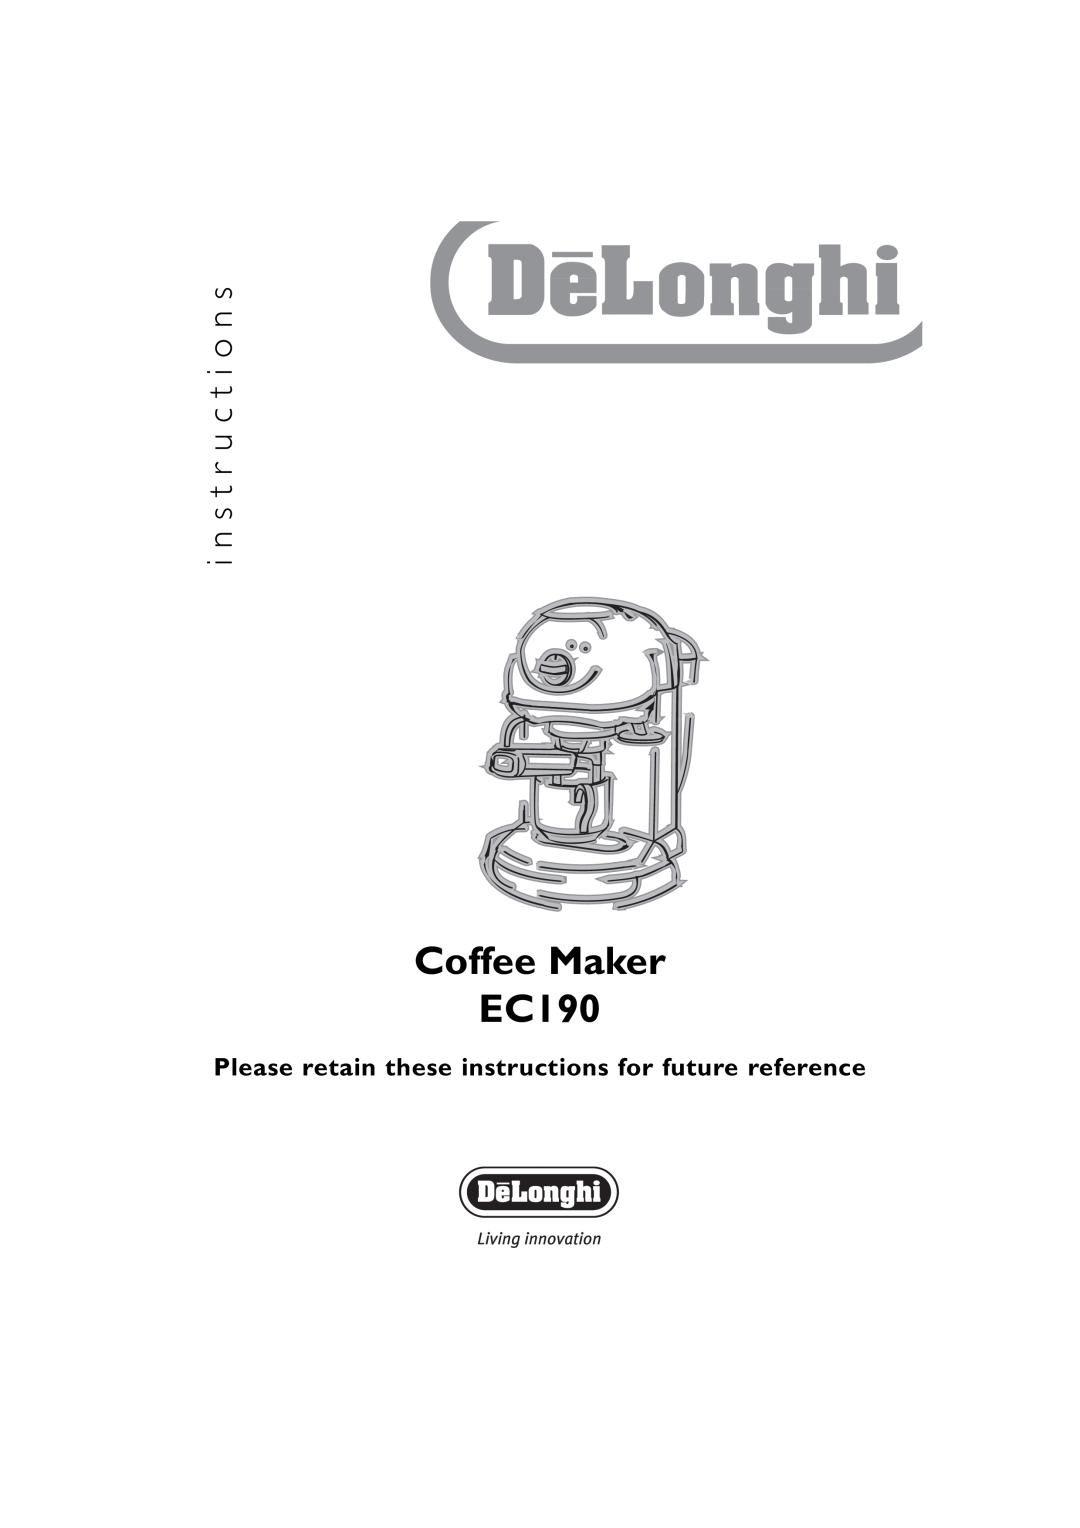 DeLonghi manual Coffee Maker EC190, i n s t r u c t i o n s, Please retain these instructions for future reference 